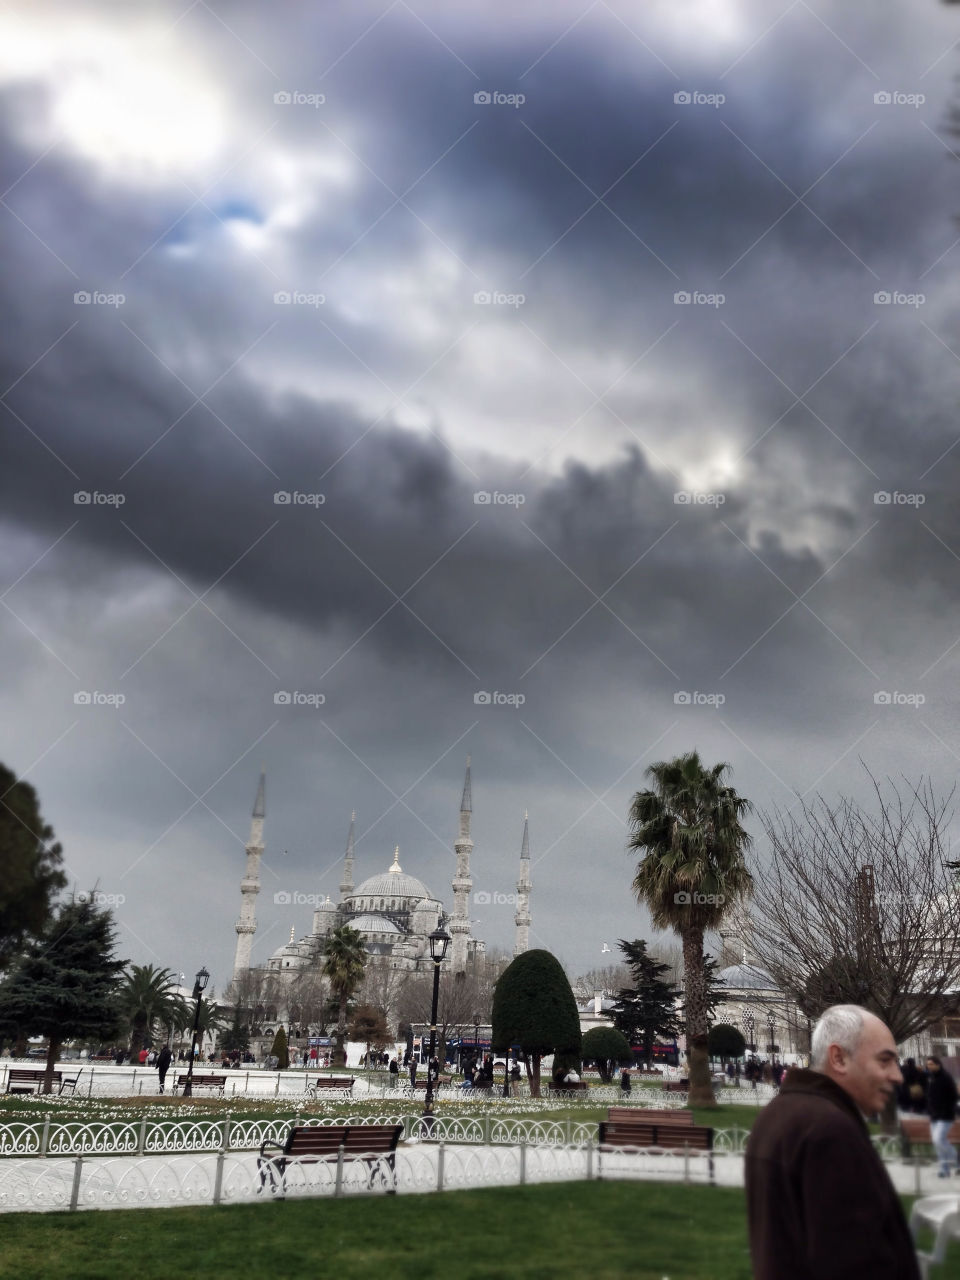 The angry skies over the beautiful blue mosque, Istanbul, Turkey.